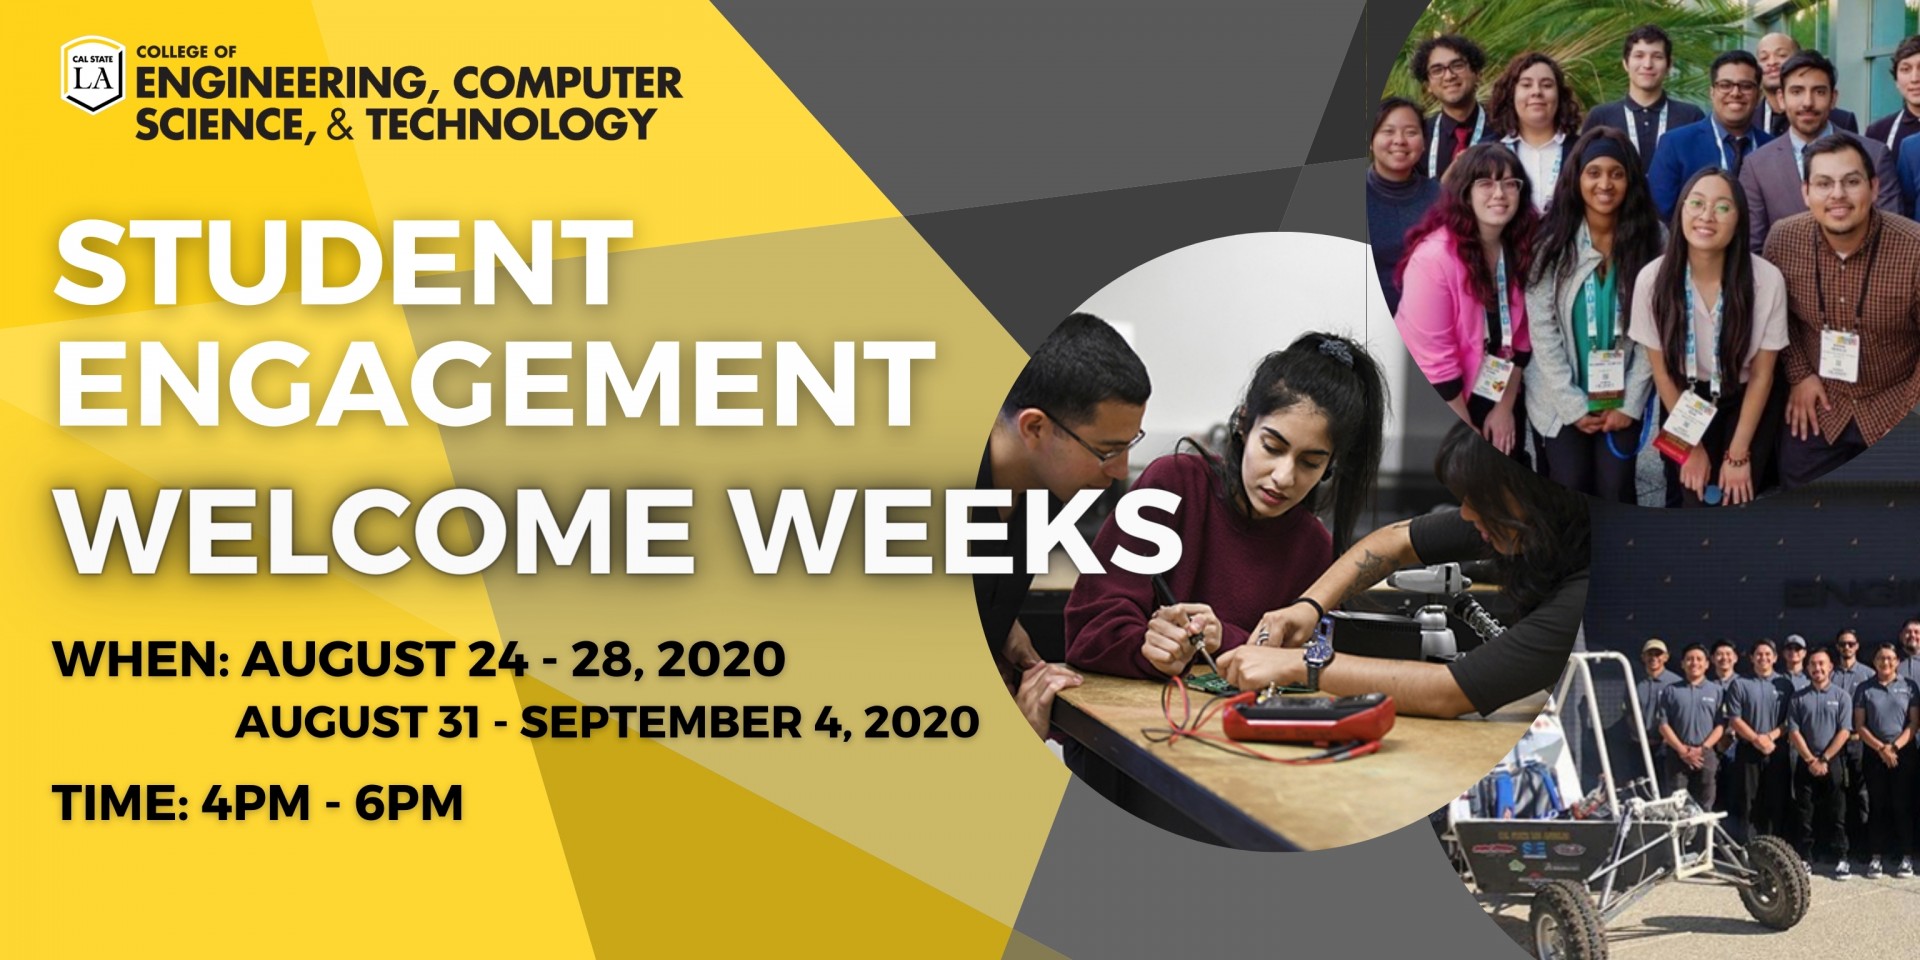 Cal State LA College of ECST Student Engagement + Welcome Weeks   August 31 to September 4